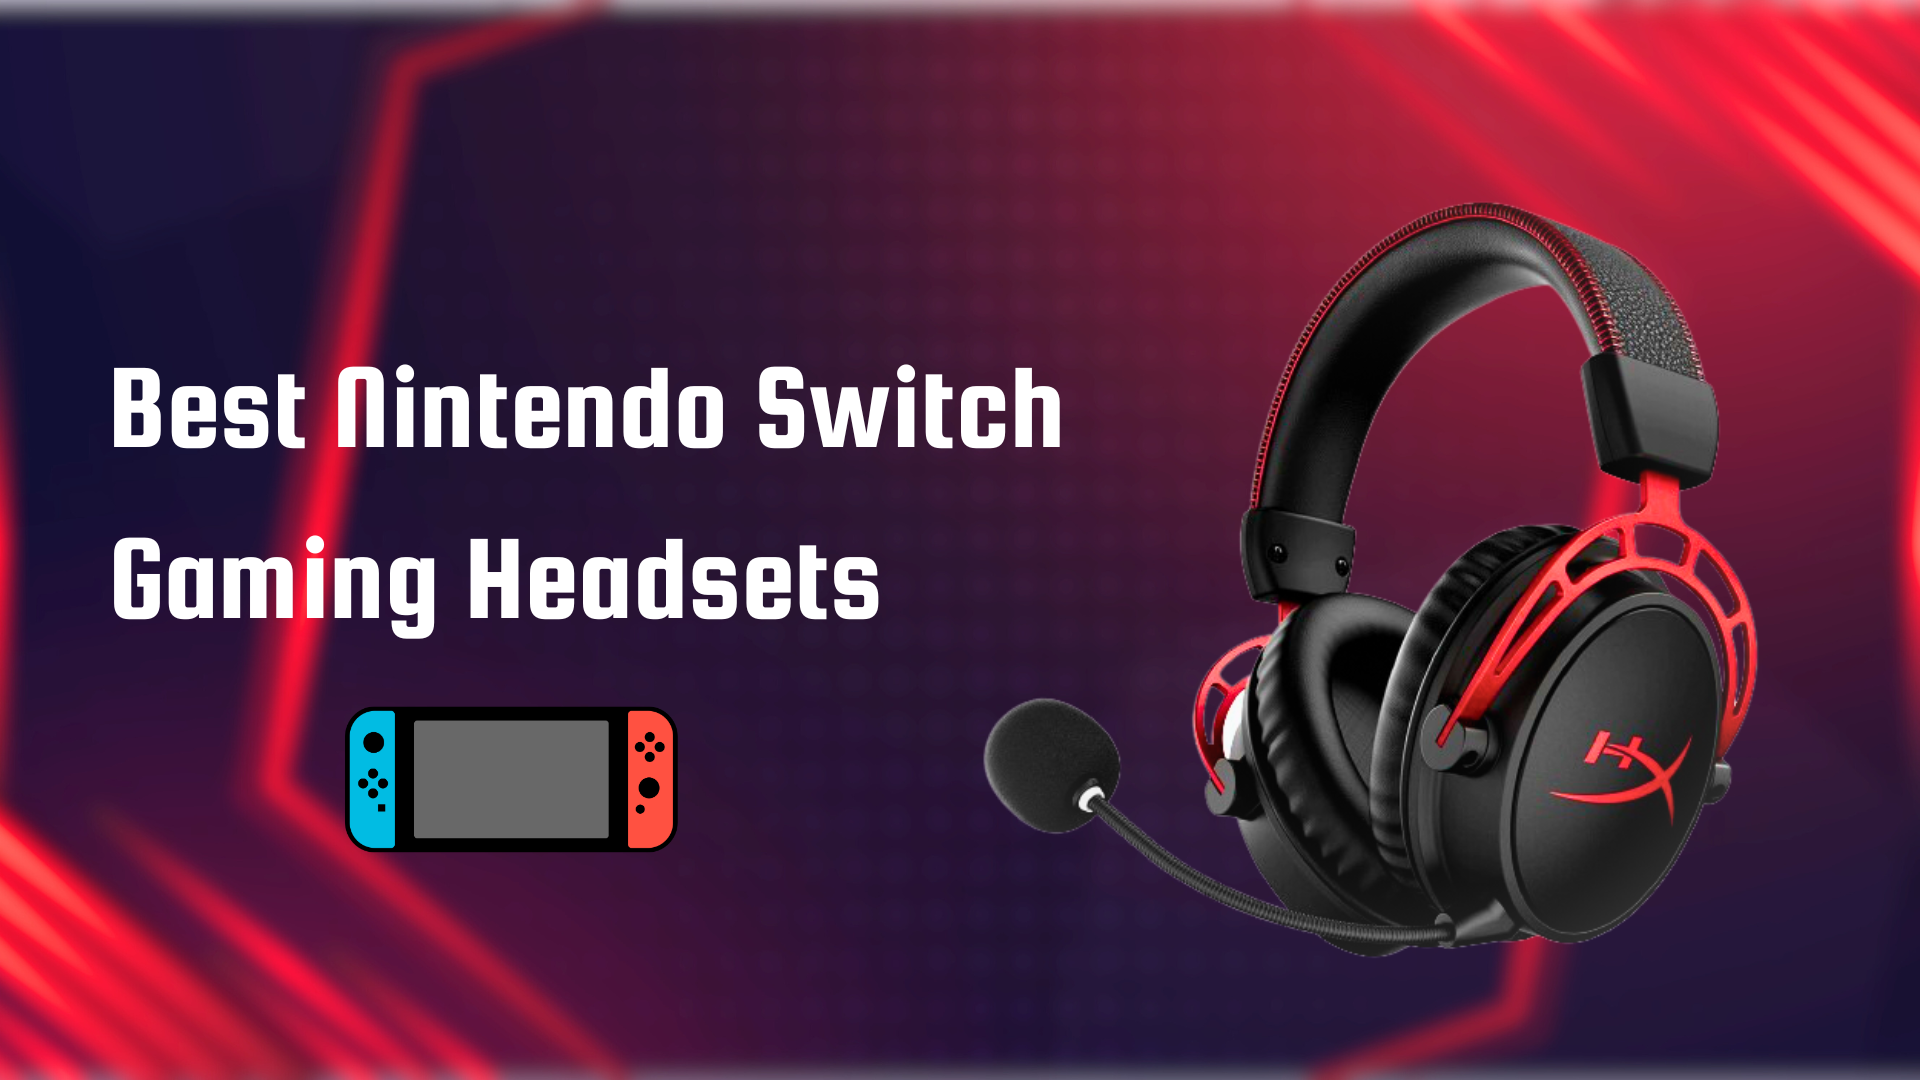 The Best Gaming Headsets for Xbox, PlayStation 5 and Nintendo Switch